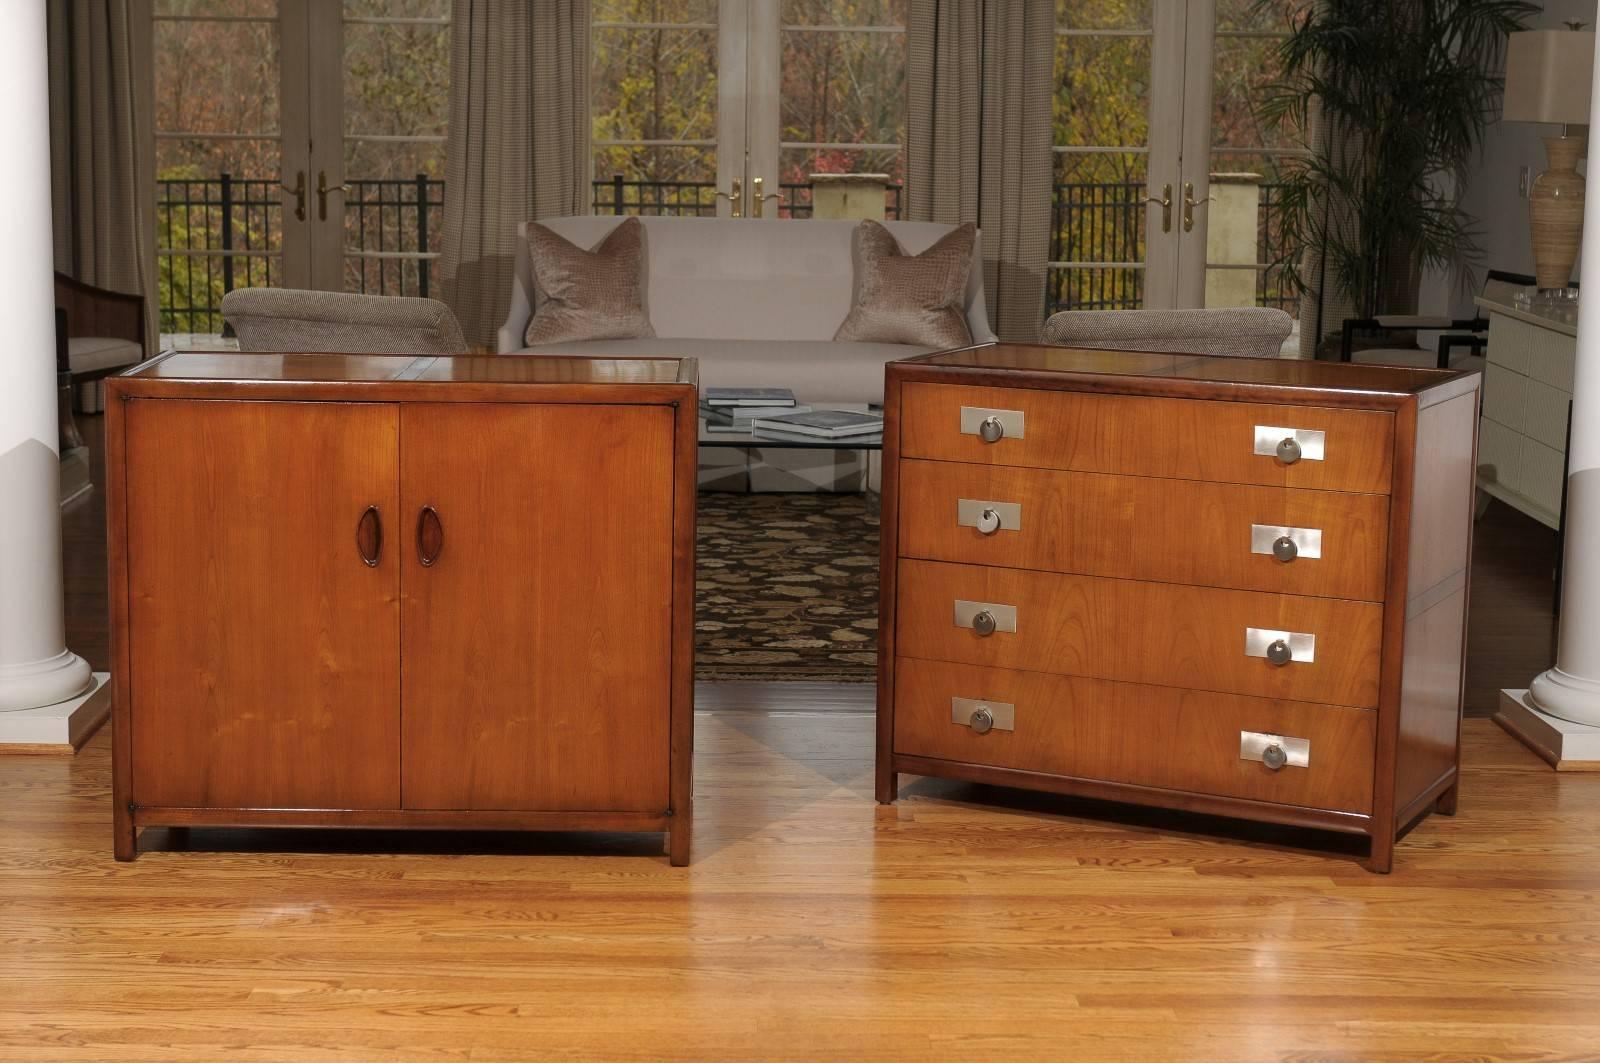 A beautiful pair of vintage commodes by Baker, circa 1960. These are examples from the boutique 